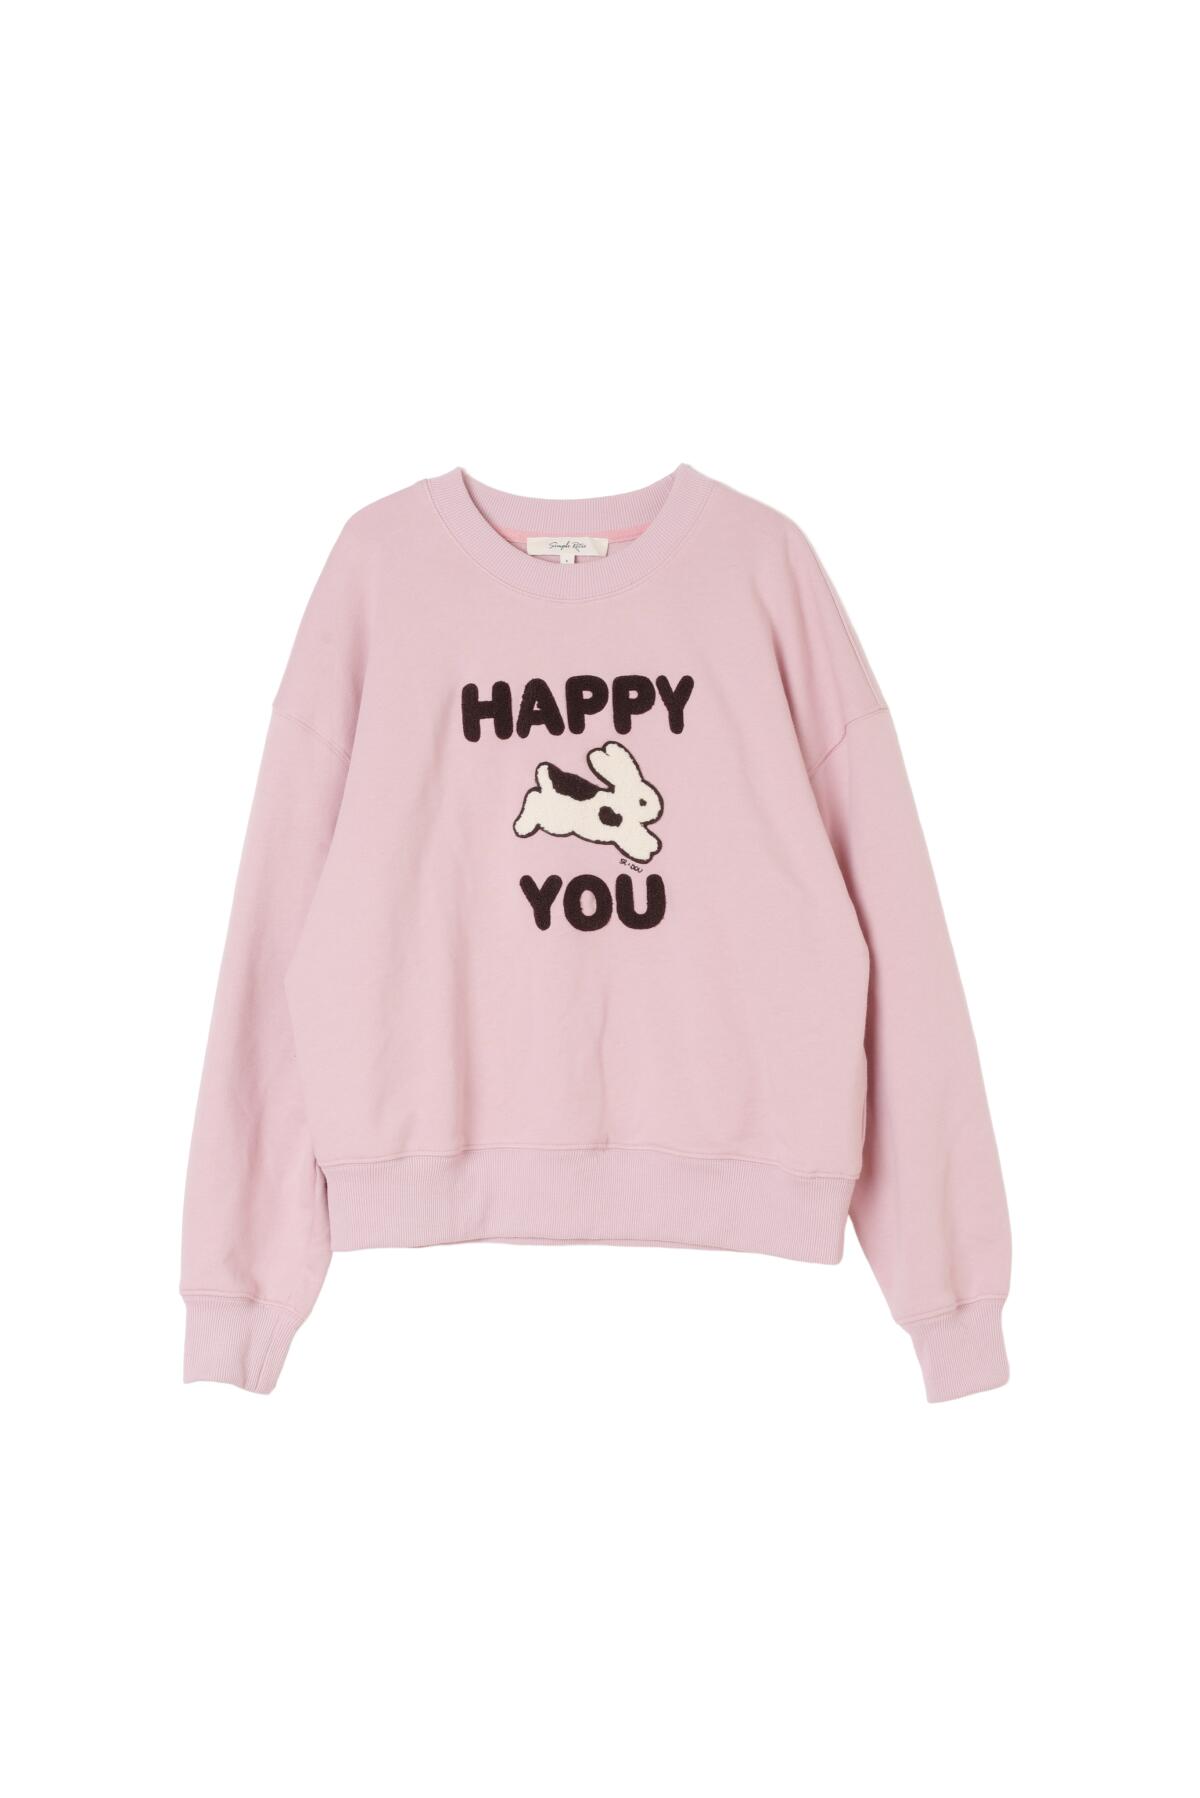 Pink sweatshirt with a leaping rabbit between the words Happy and You 